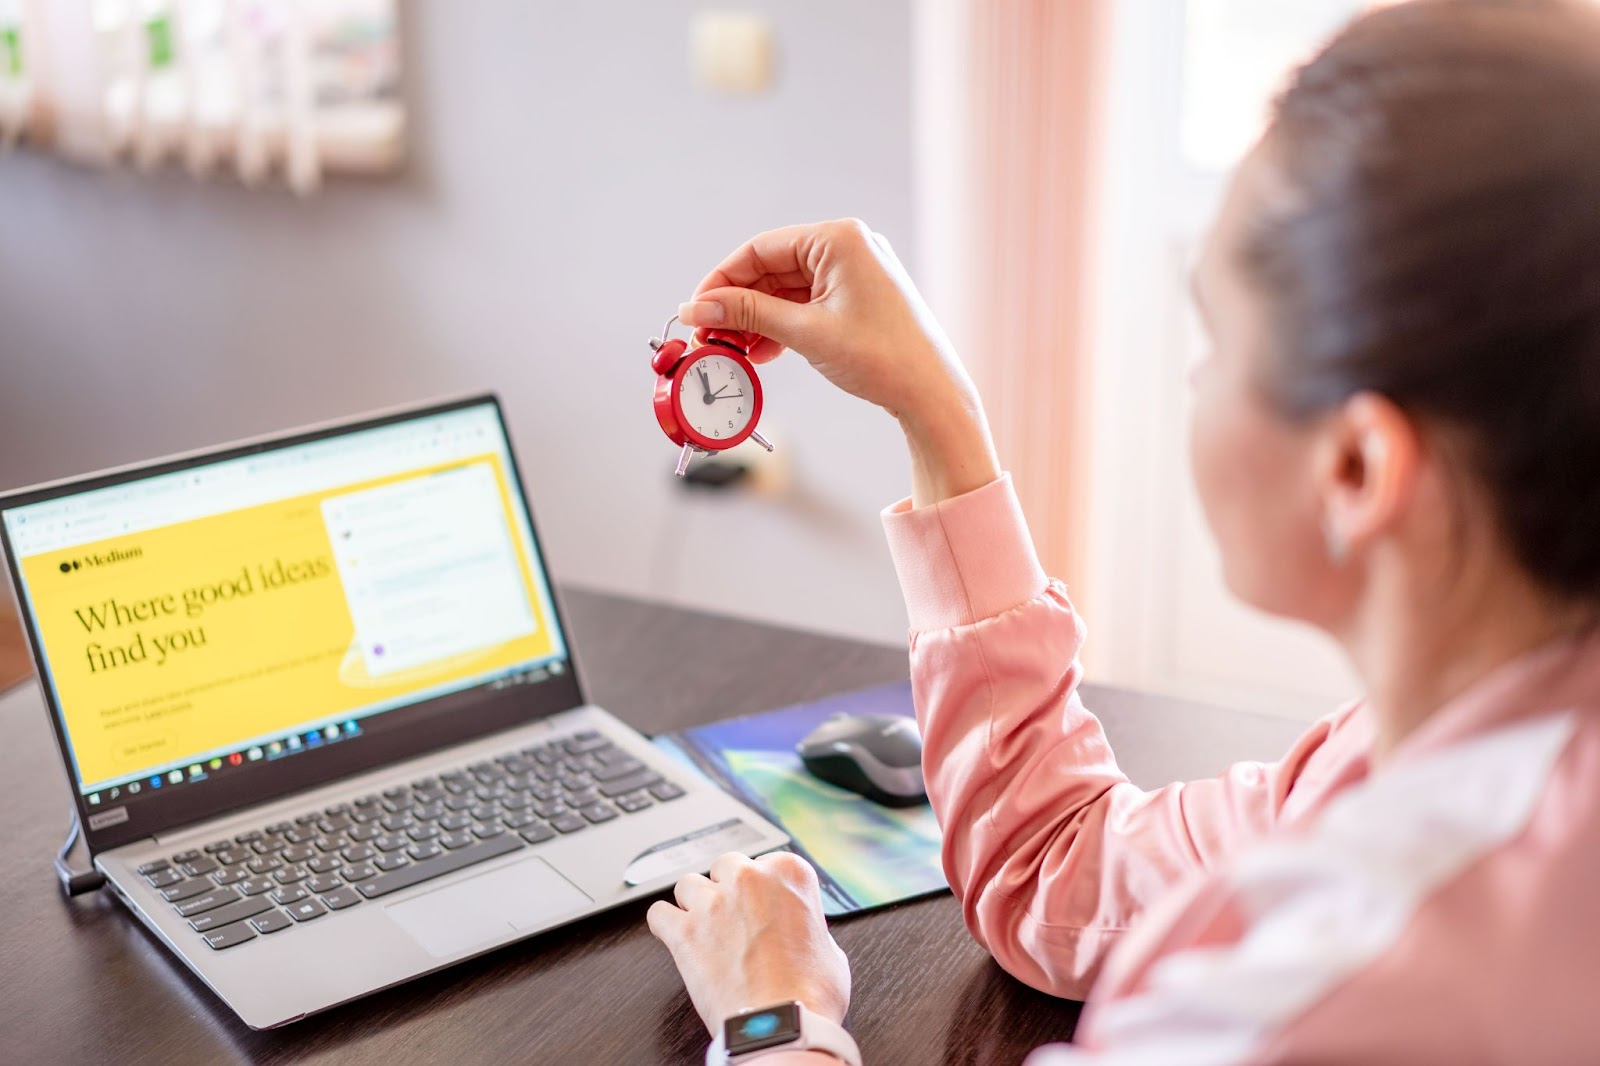 Photo of a woman holding a small red clock while her laptop is open on a yellow screen reading 'Where good ideas find you'